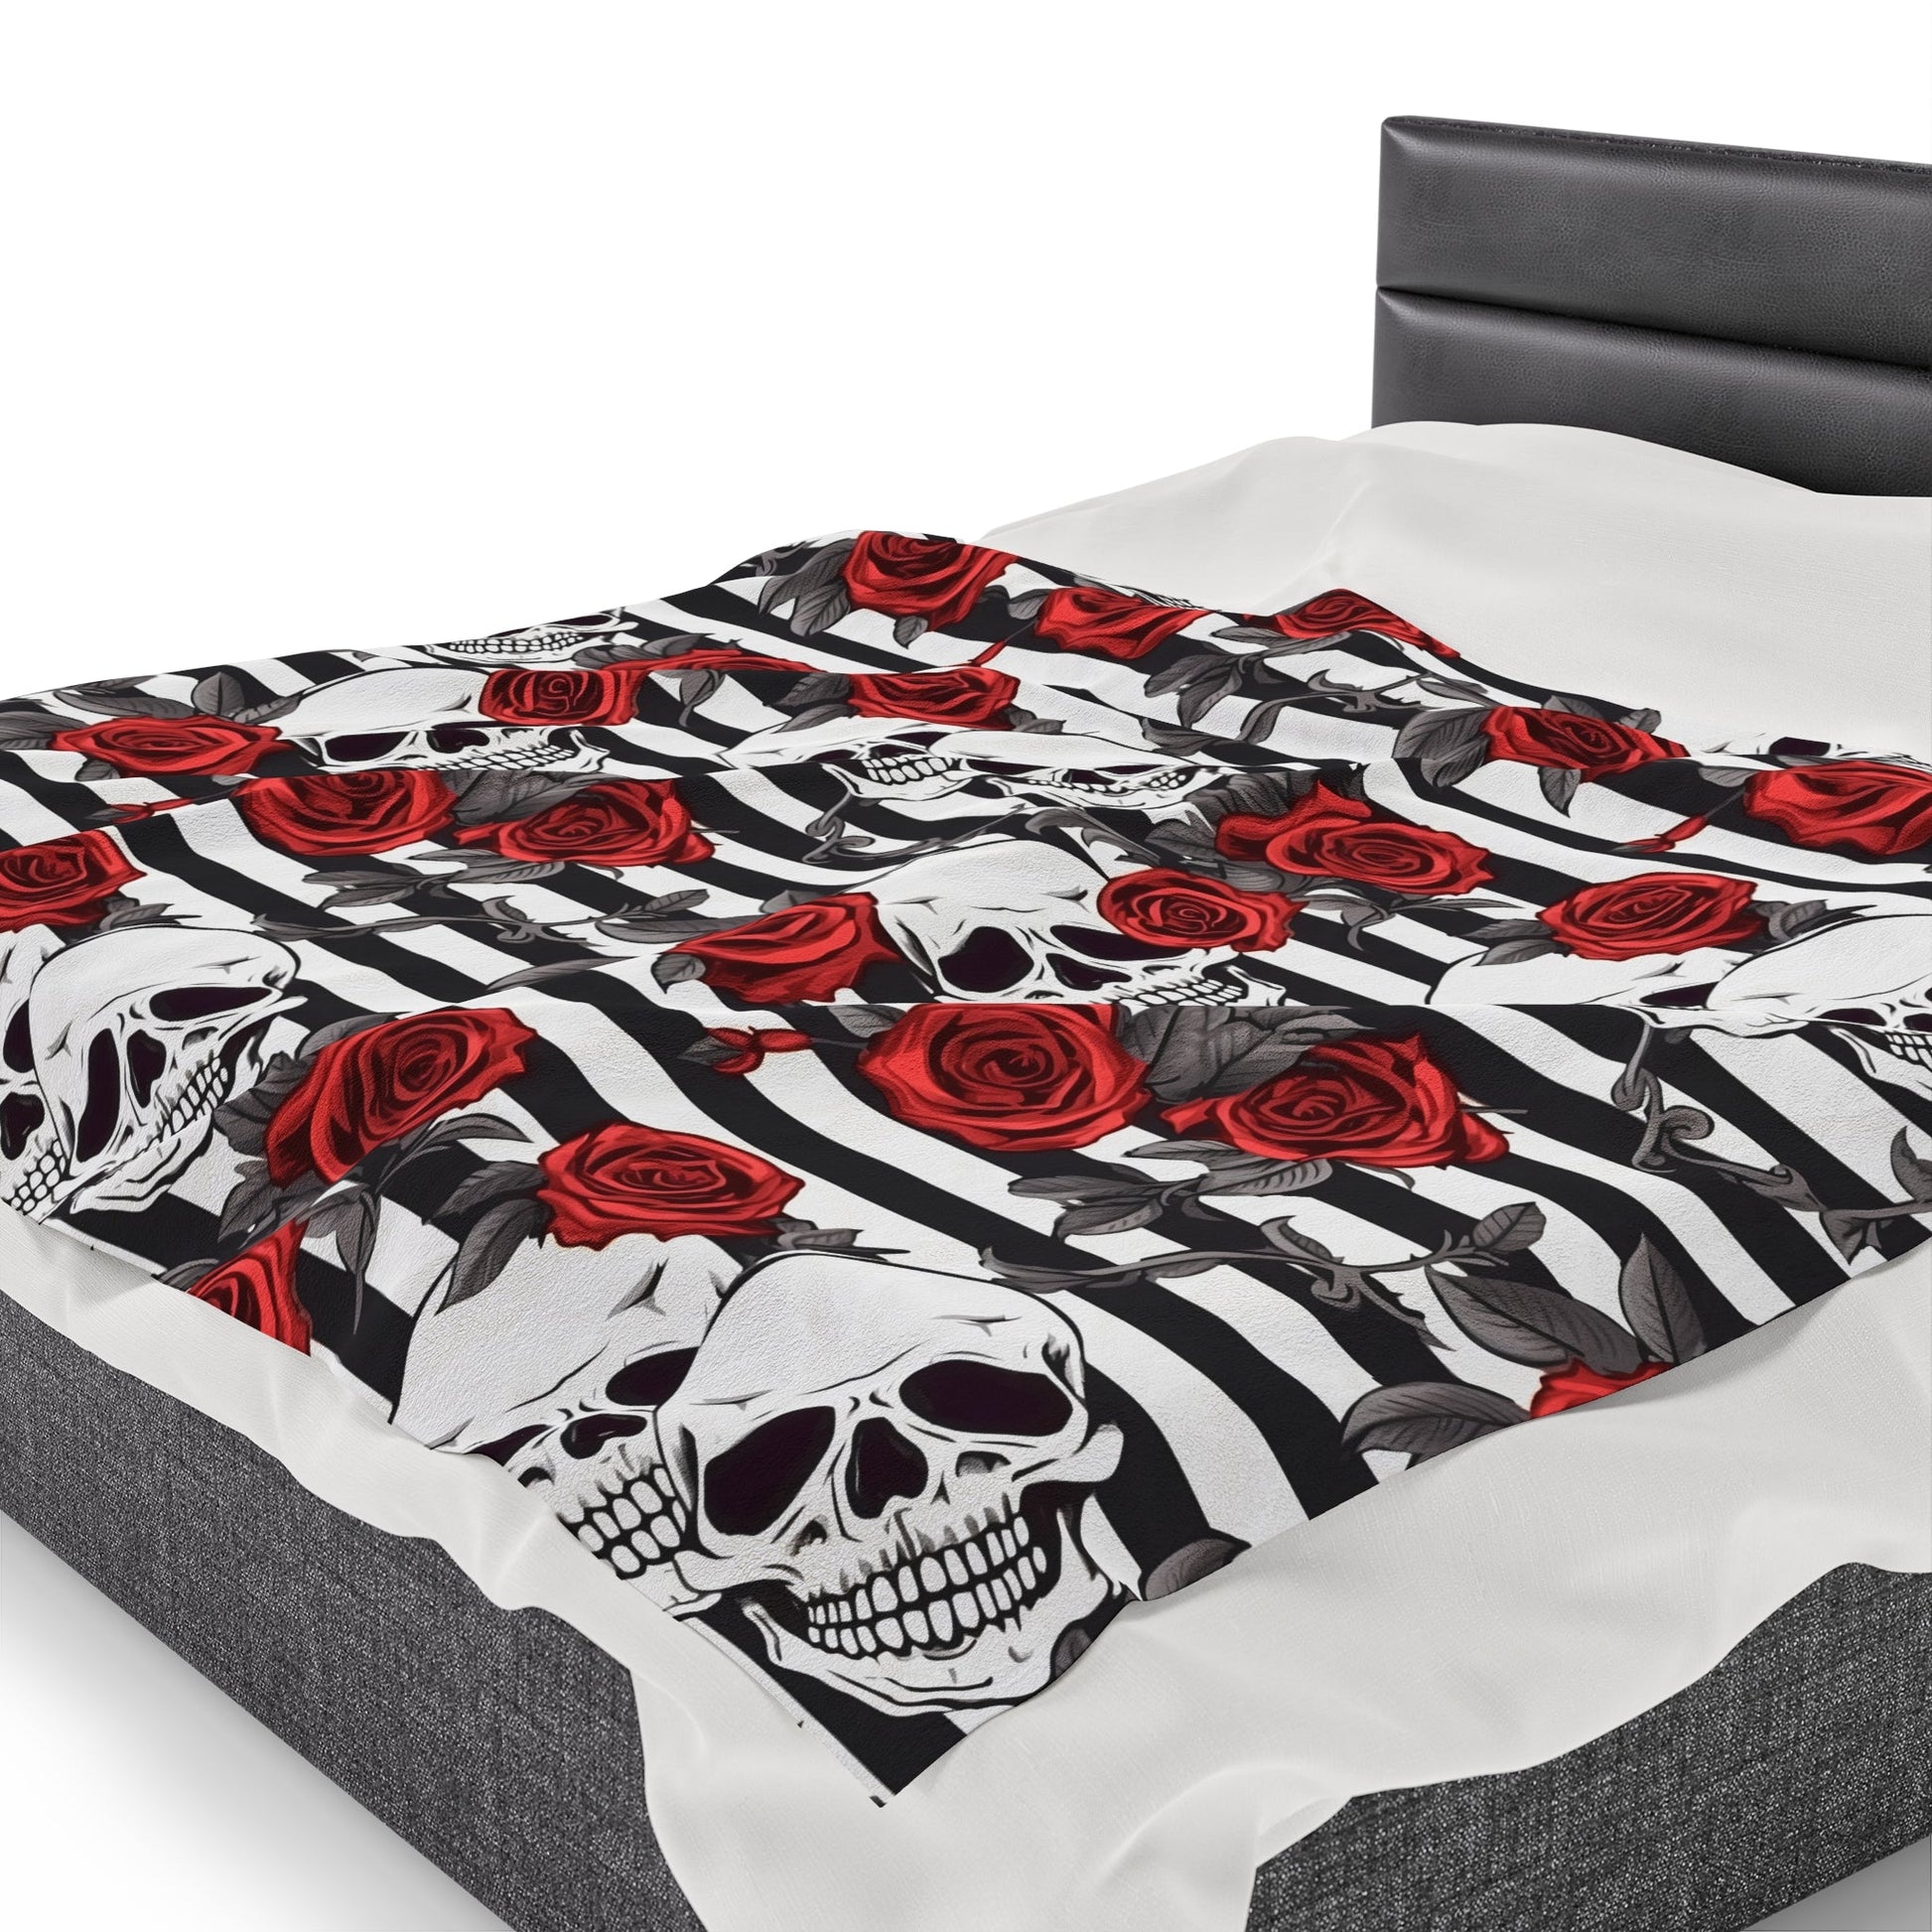 Skulls Red Roses and Stripes Throw BlanketAll Over PrintsVTZdesigns60" × 80"All Over PrintAOPBed